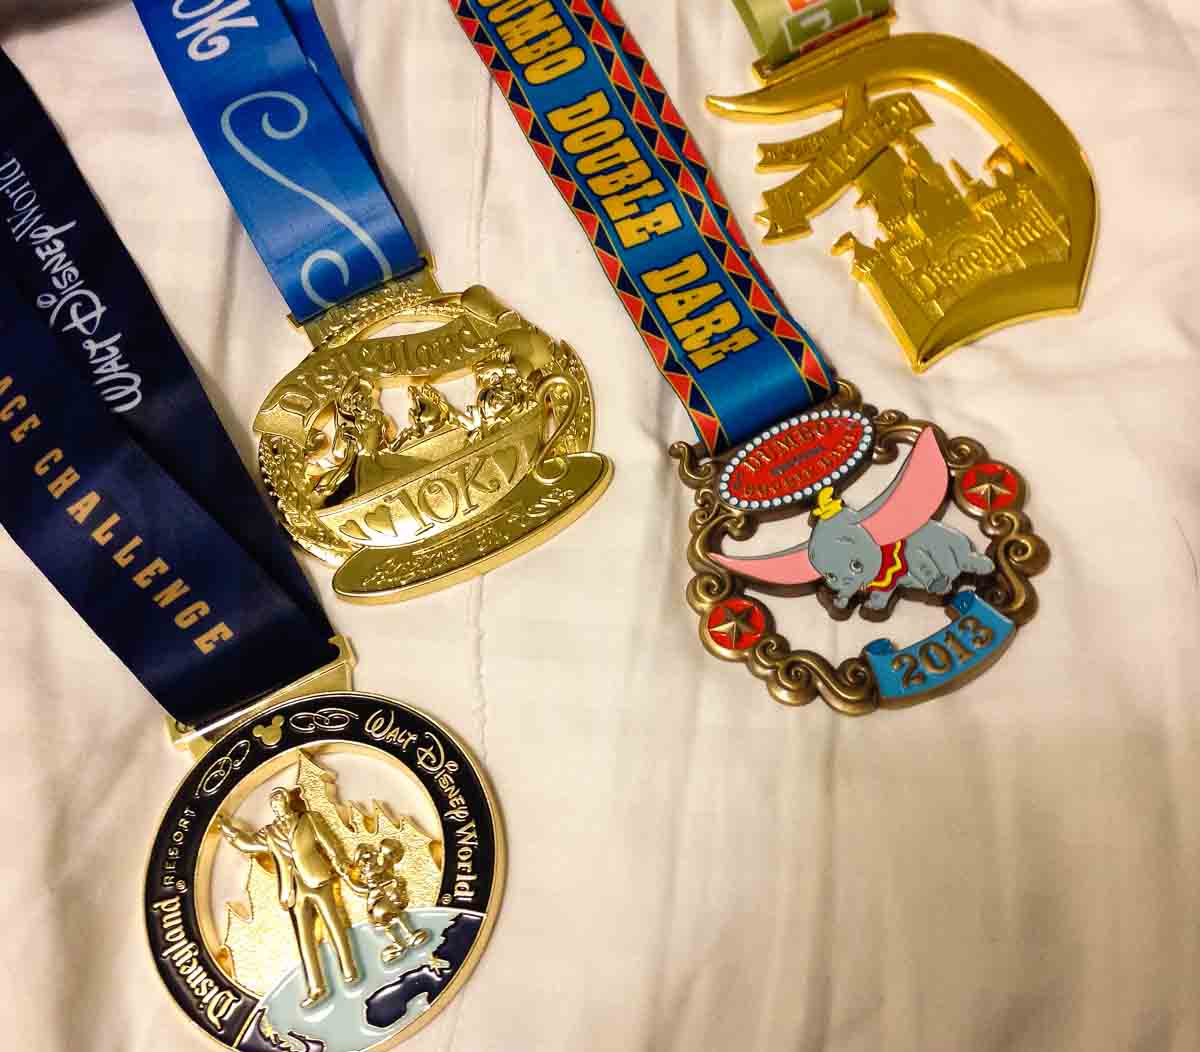 Dumbo Double Dare medal collection